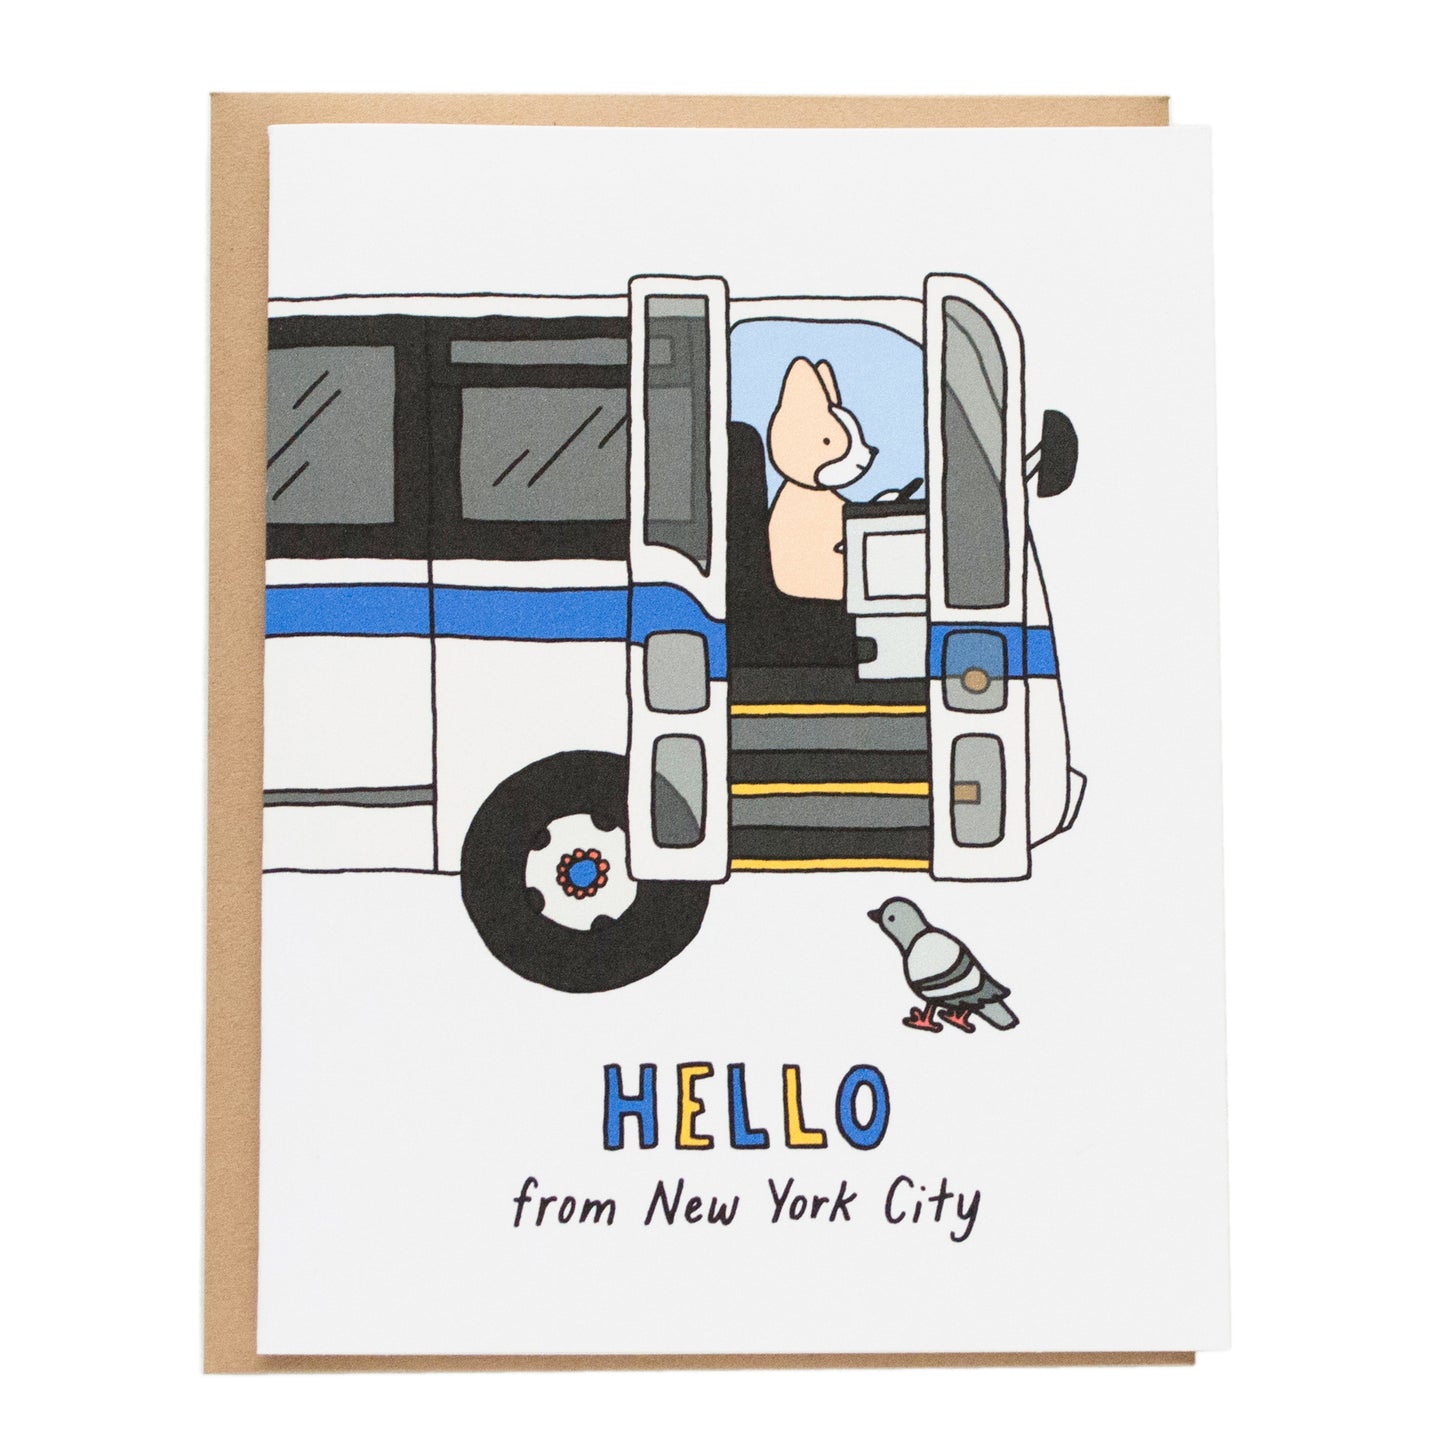 new york city inspired drawing of a corgi driving a bus with doors open and iconic pigeon standing outside, card reads: hello from new york city